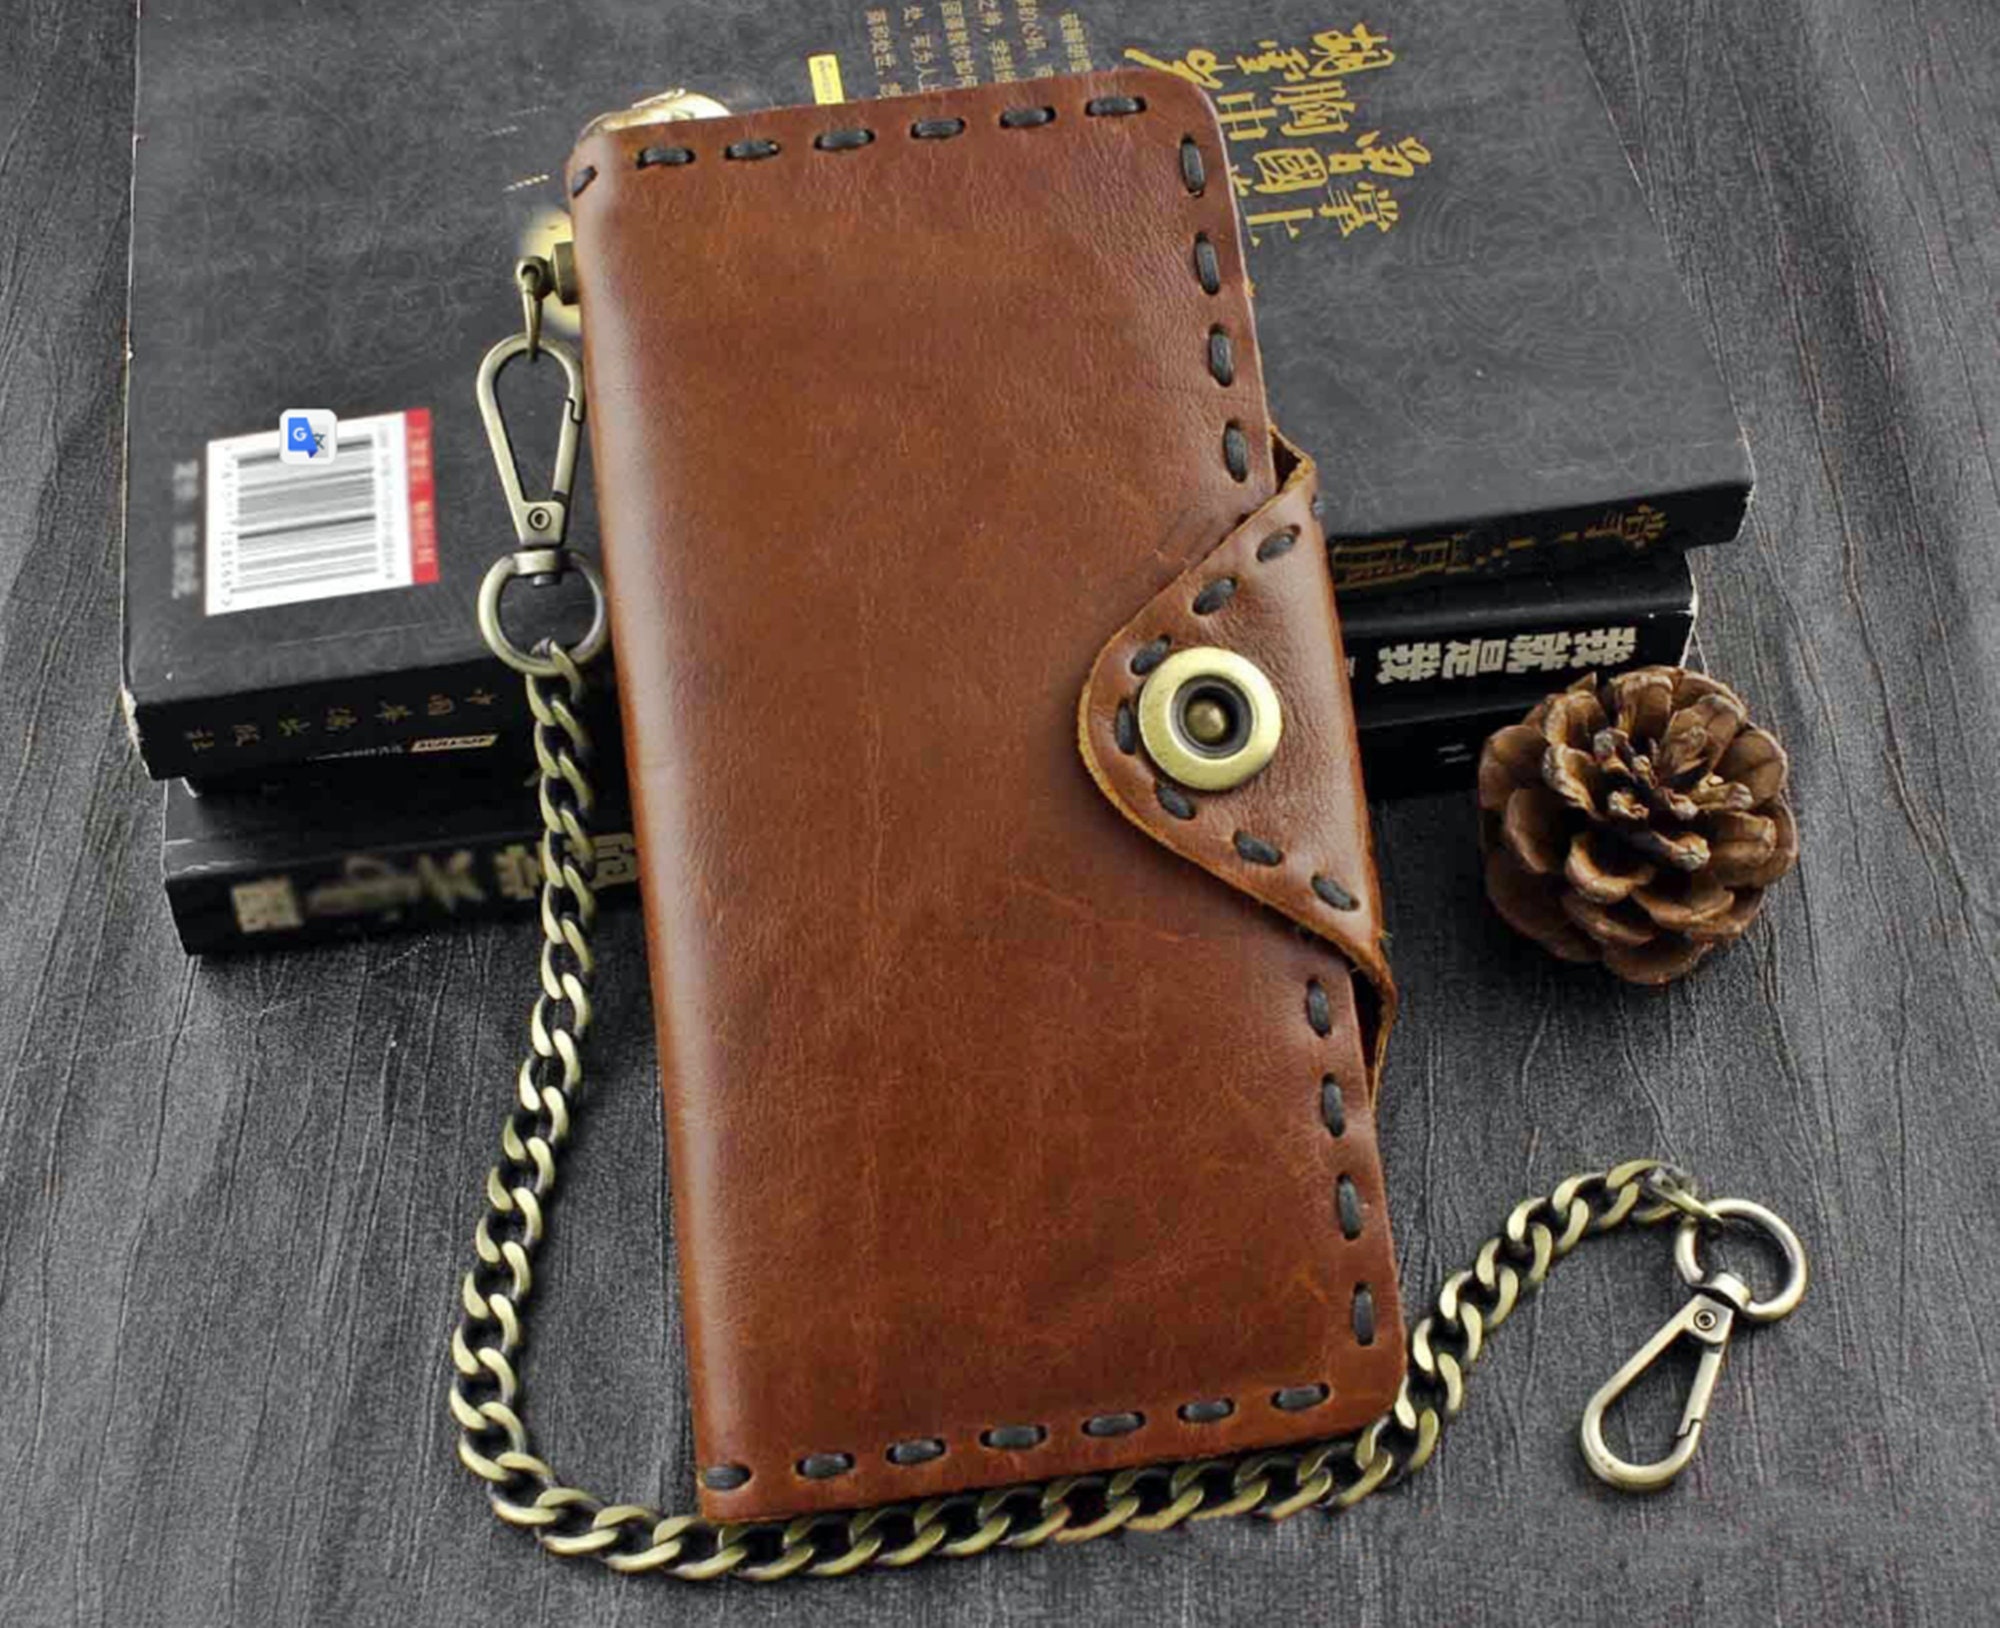 Retro Check Pattern Wallet For Men PU Leather Wallets Credit Card Holder  Money Change Pouch Man Birthday Gifts - AliExpress